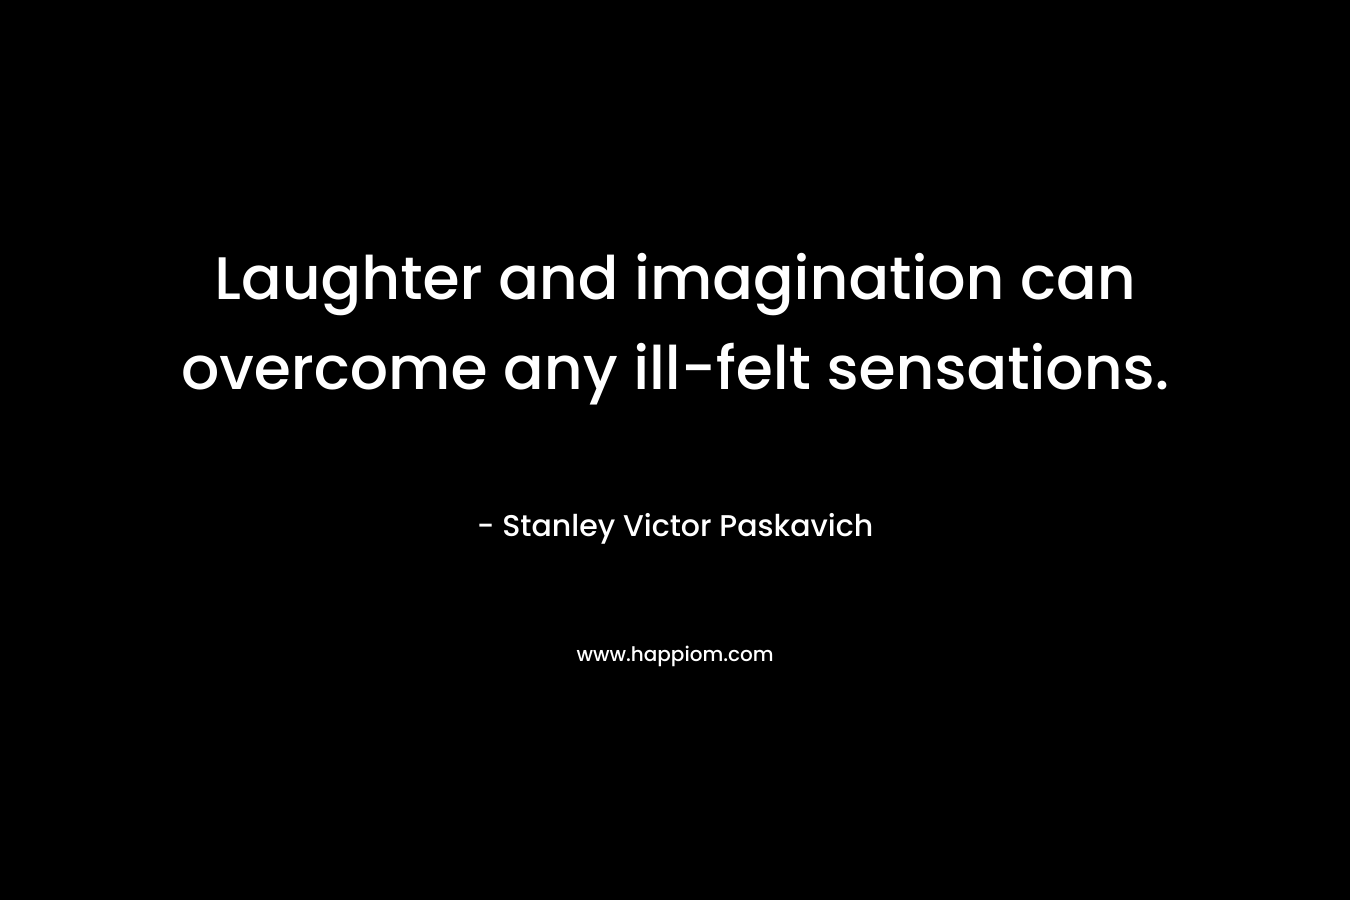 Laughter and imagination can overcome any ill-felt sensations.